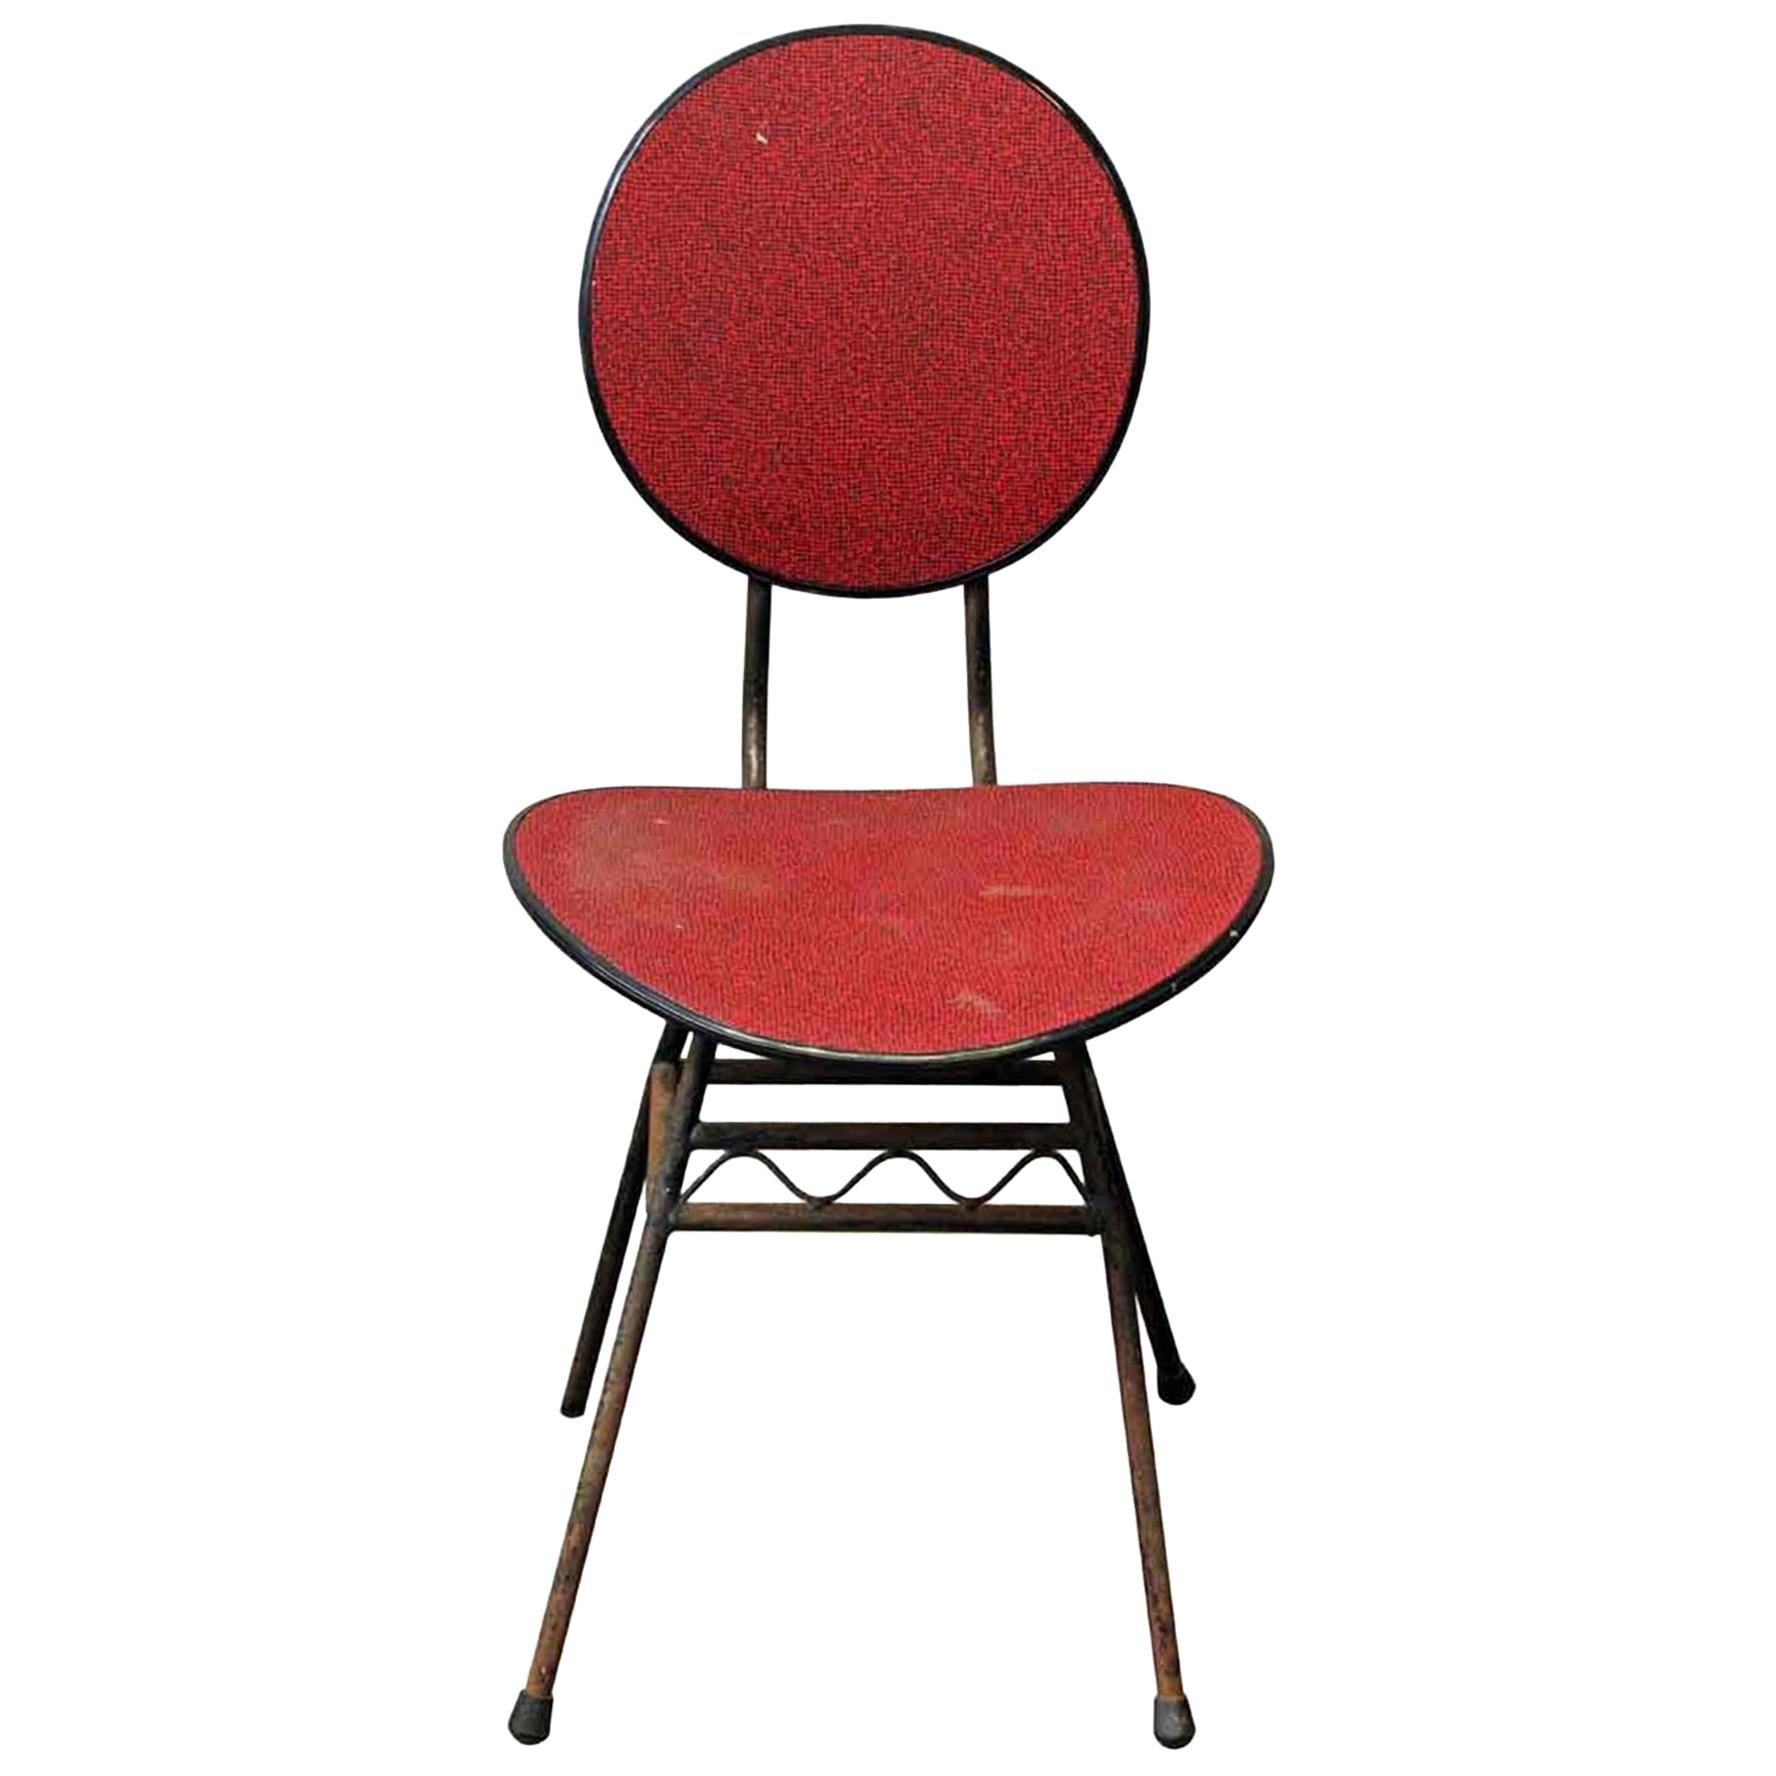 1960s French Mid-Century Modern Black and Red Chair